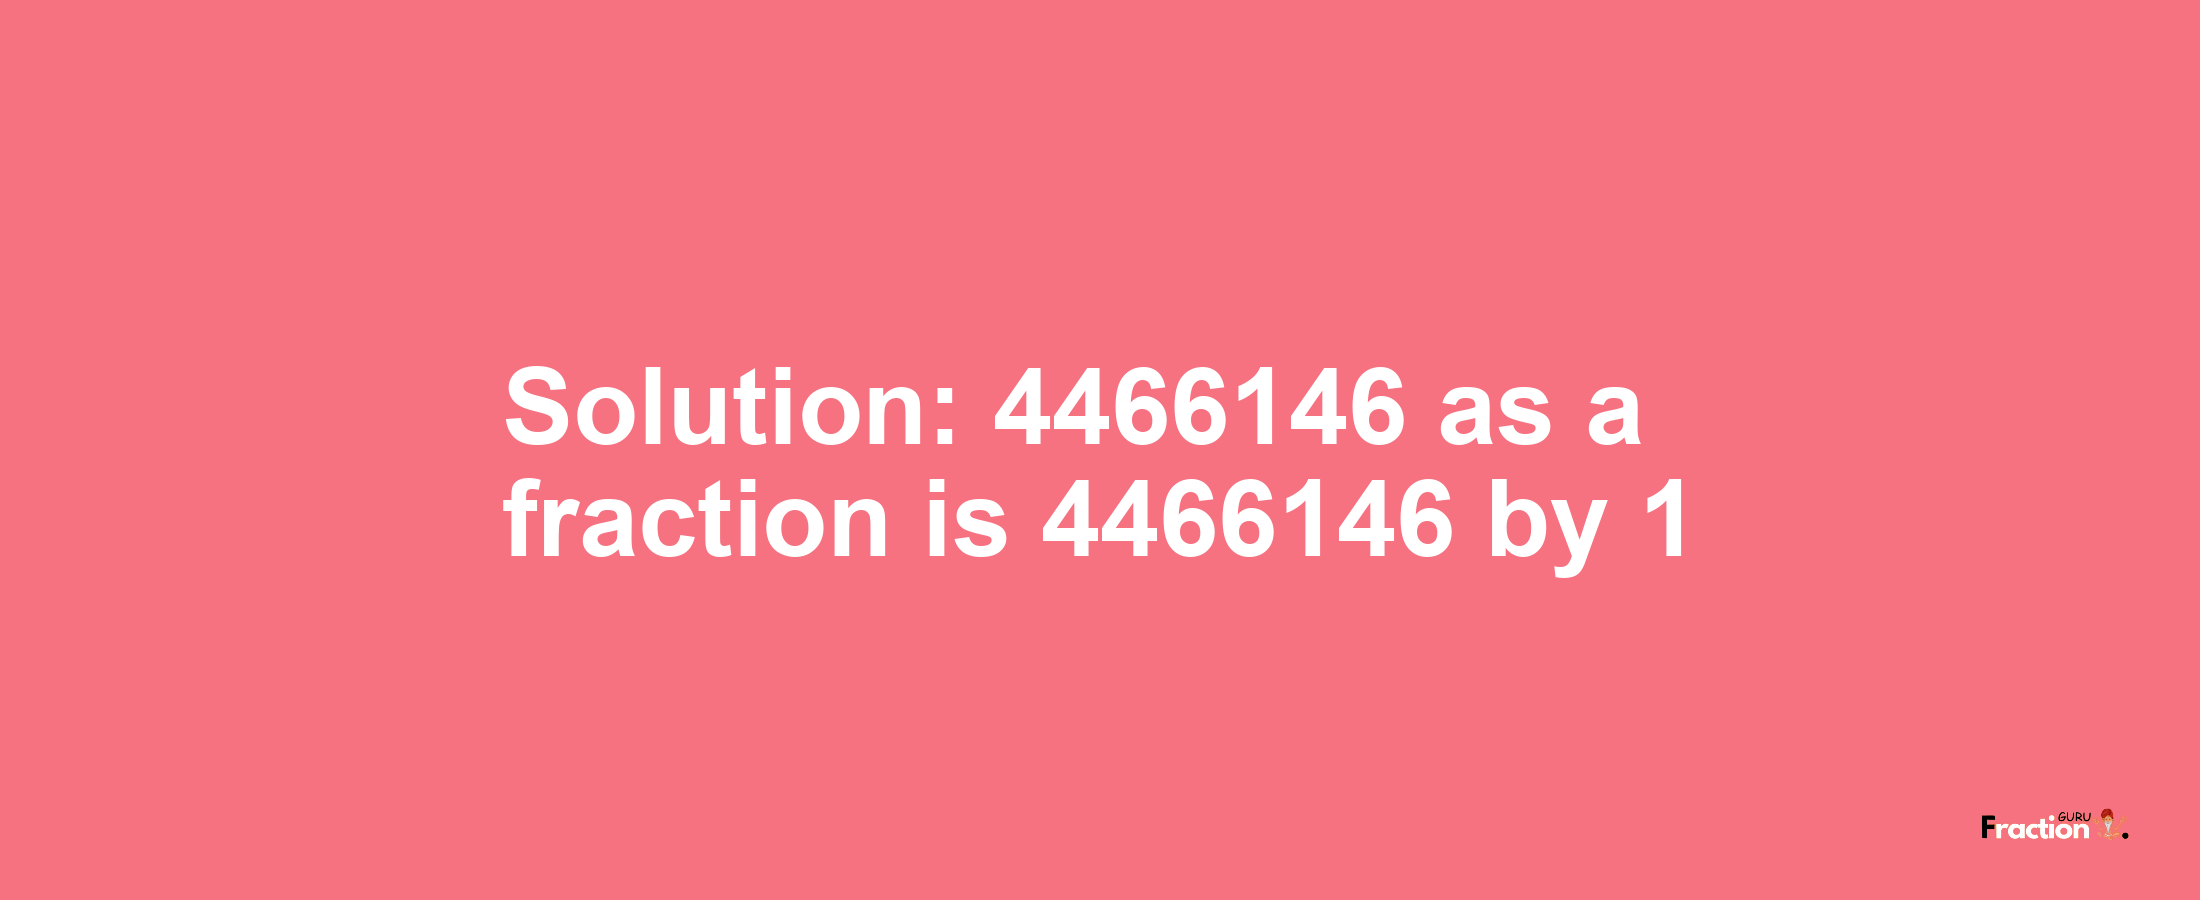 Solution:4466146 as a fraction is 4466146/1